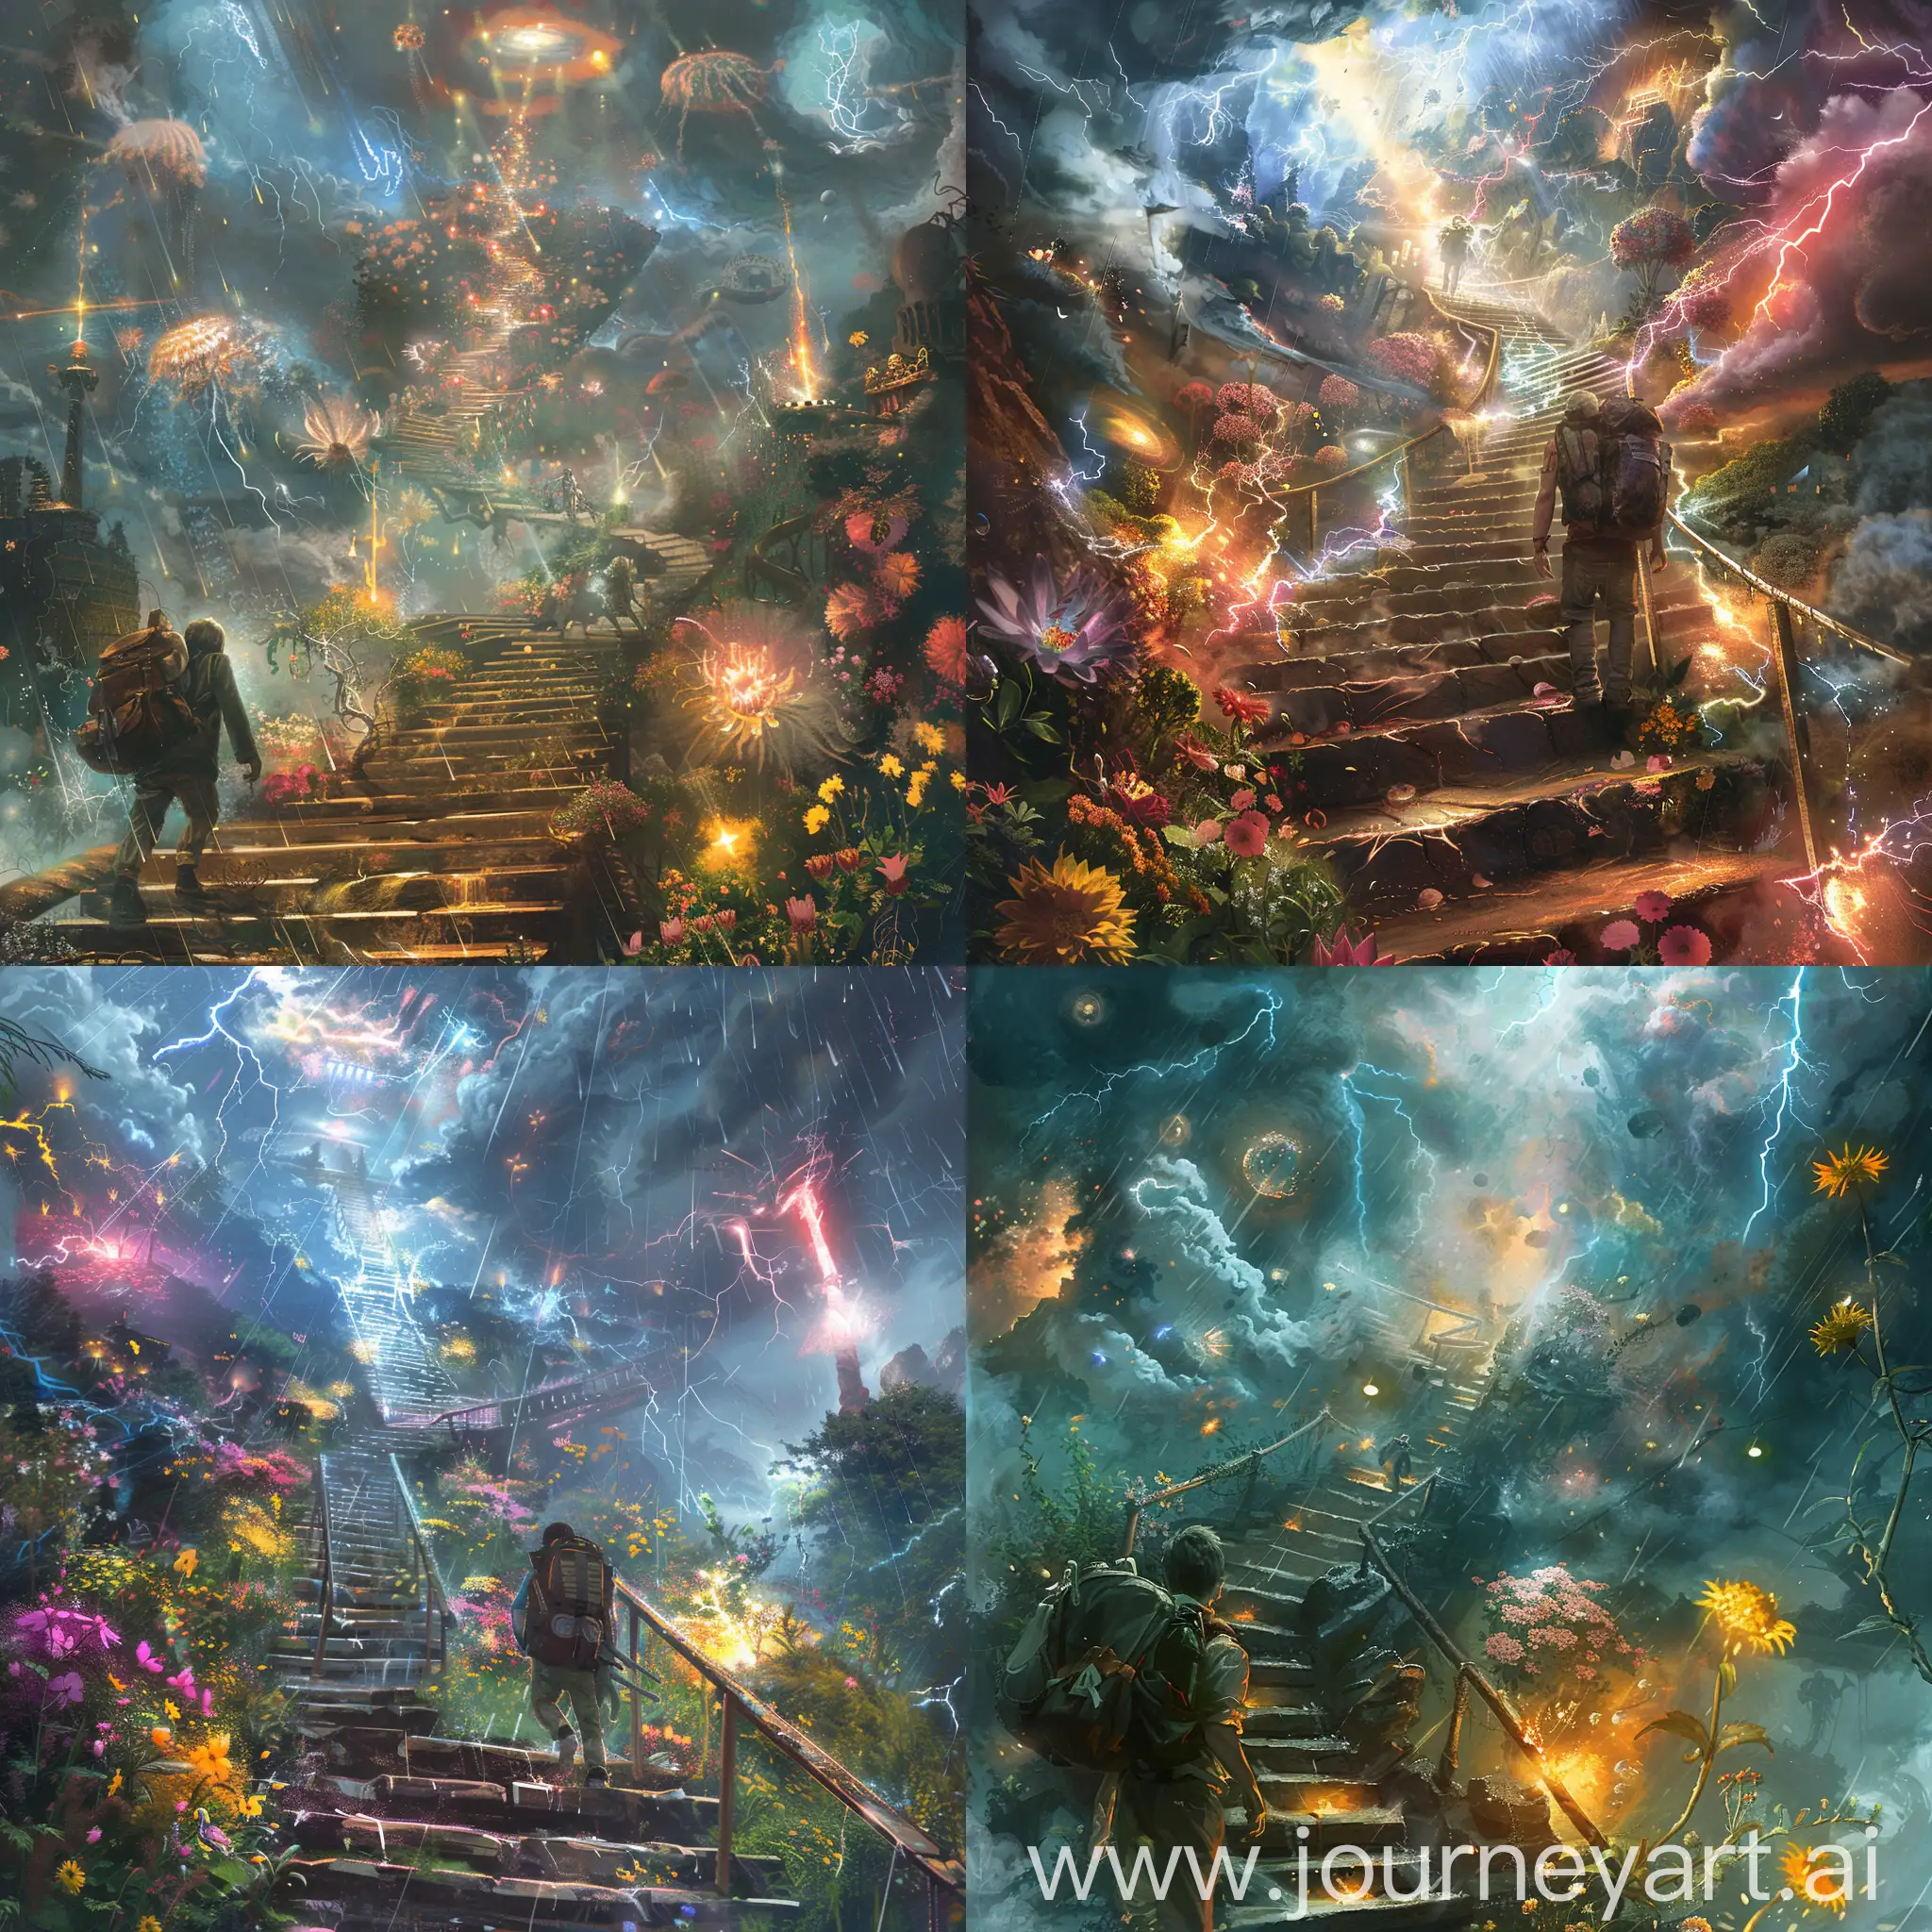 Courageous-Ascent-Man-Climbing-Staircase-in-Mystical-Landscape